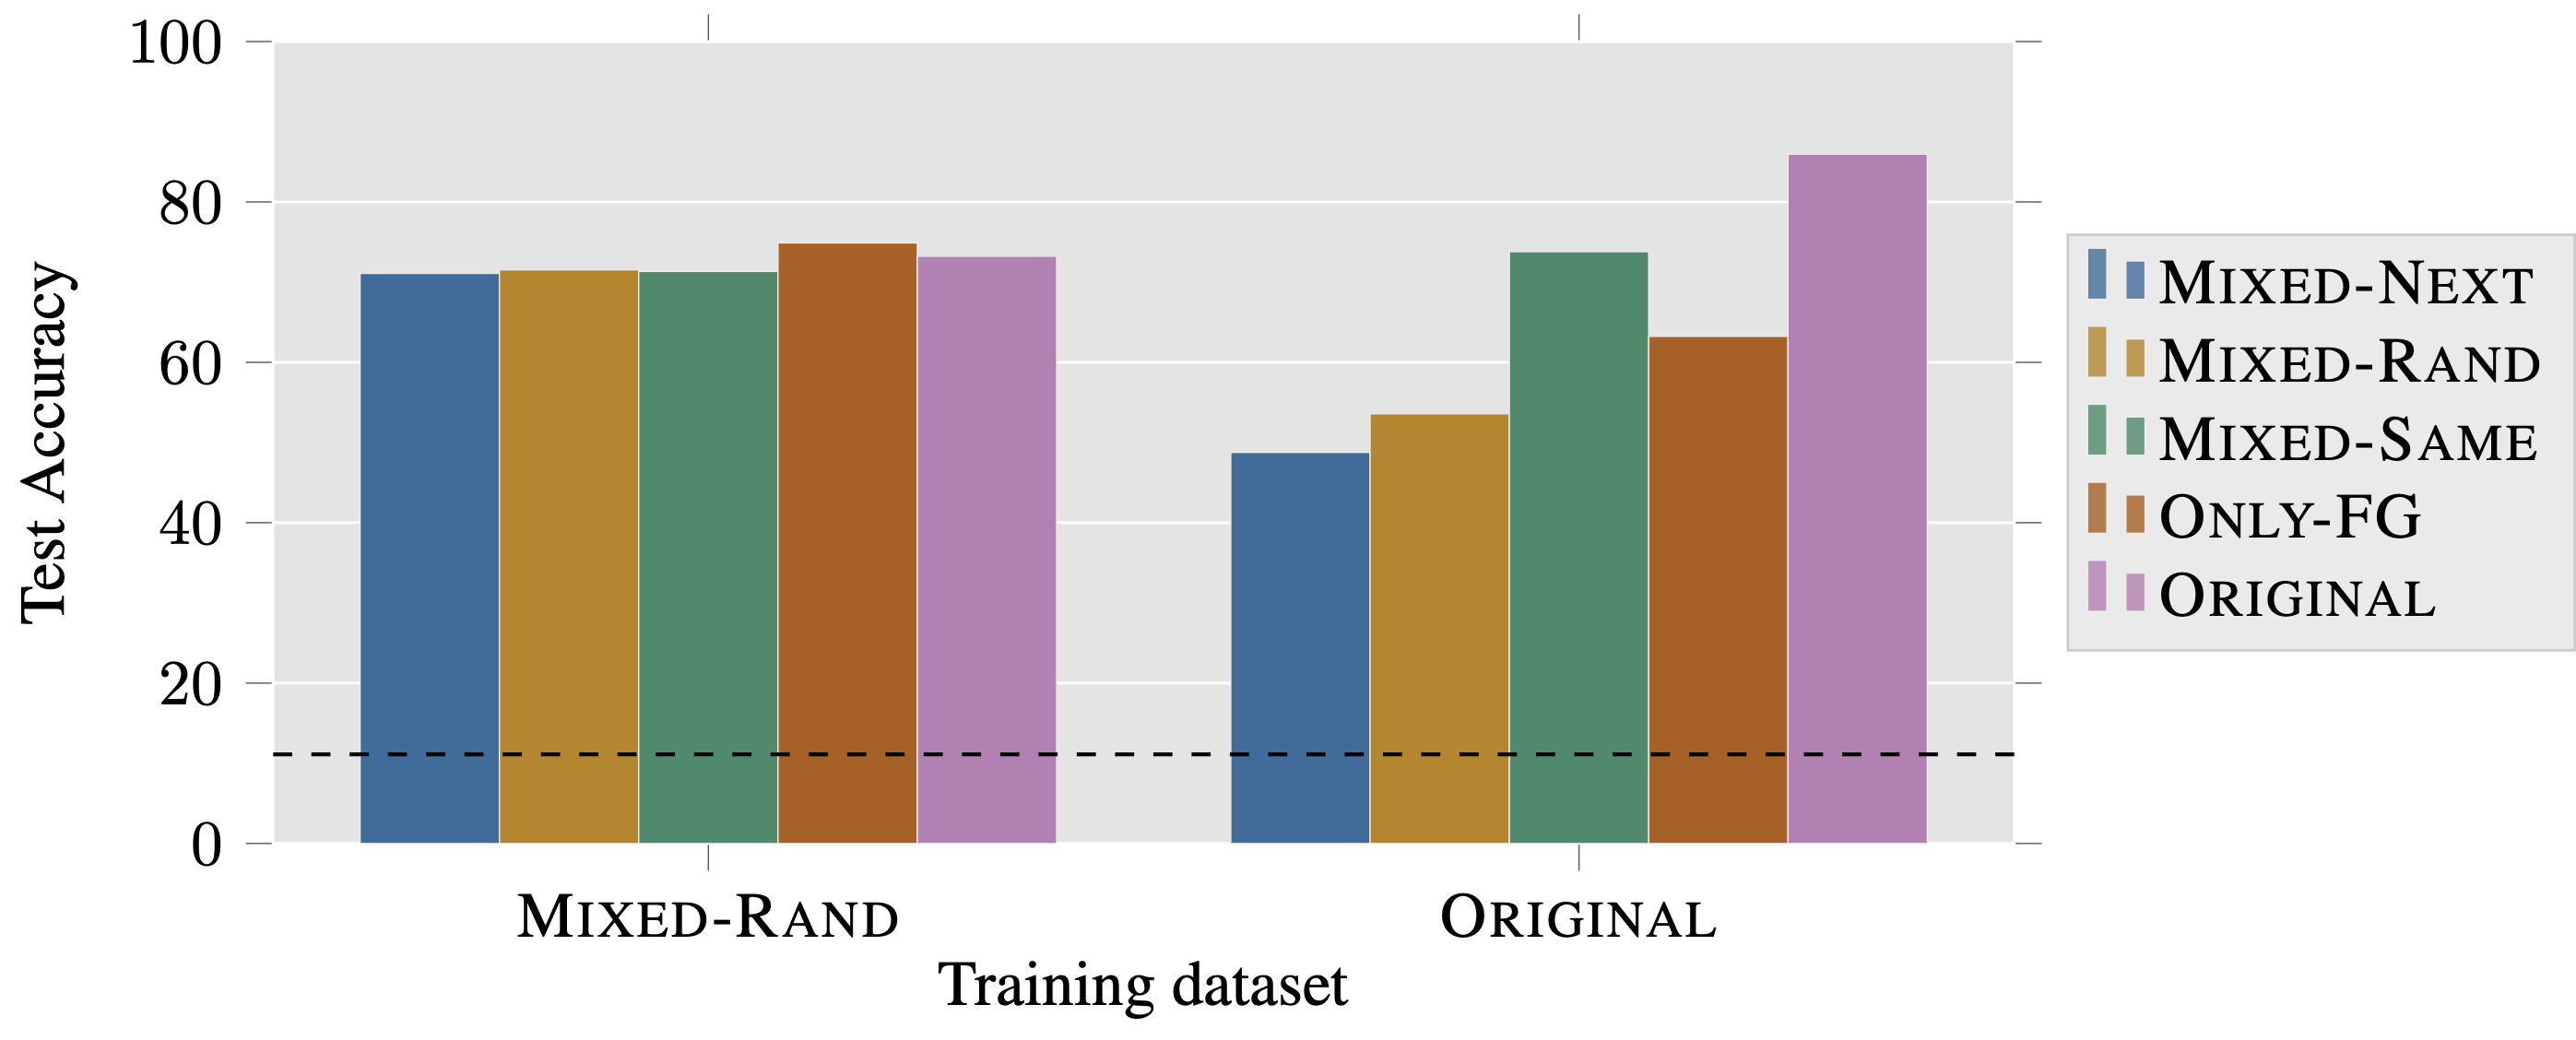 Training on Mixed-Rand and evaluating on other datasets